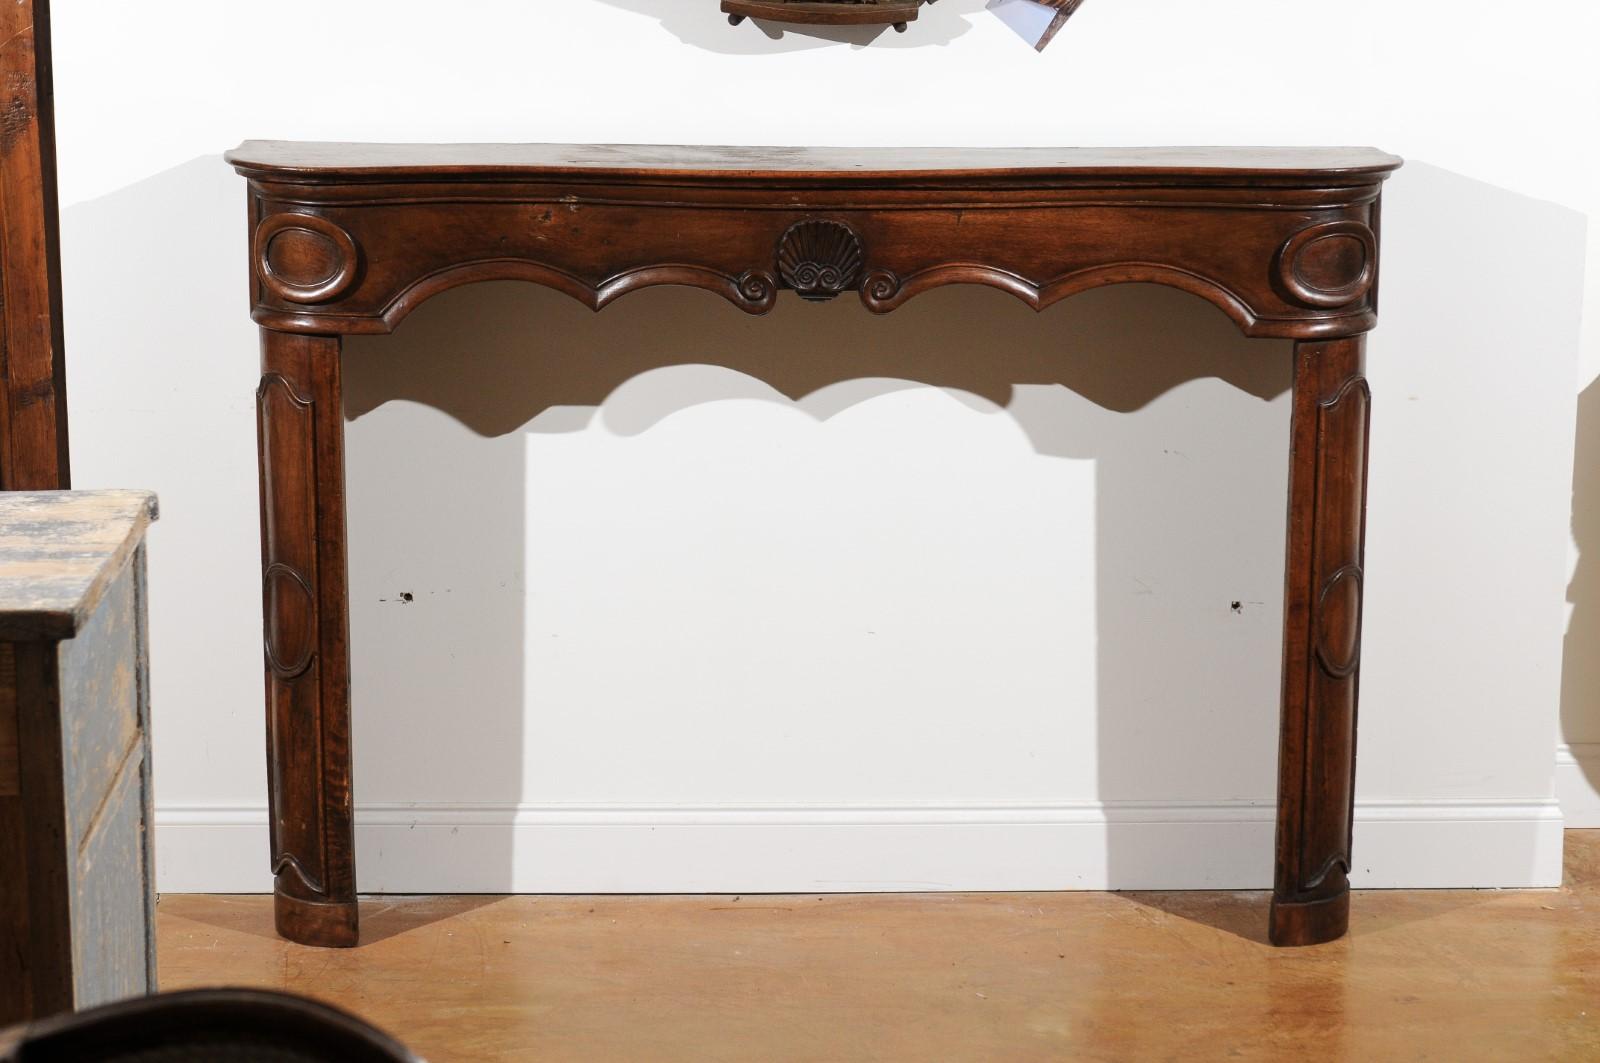 A French Louis XV period Provençal walnut fireplace mantel from the 18th century, with carved shell. Born in Provence during the 18th century, this walnut fireplace mantel features a serpentine top sitting above a lovely scalloped apron adorned with